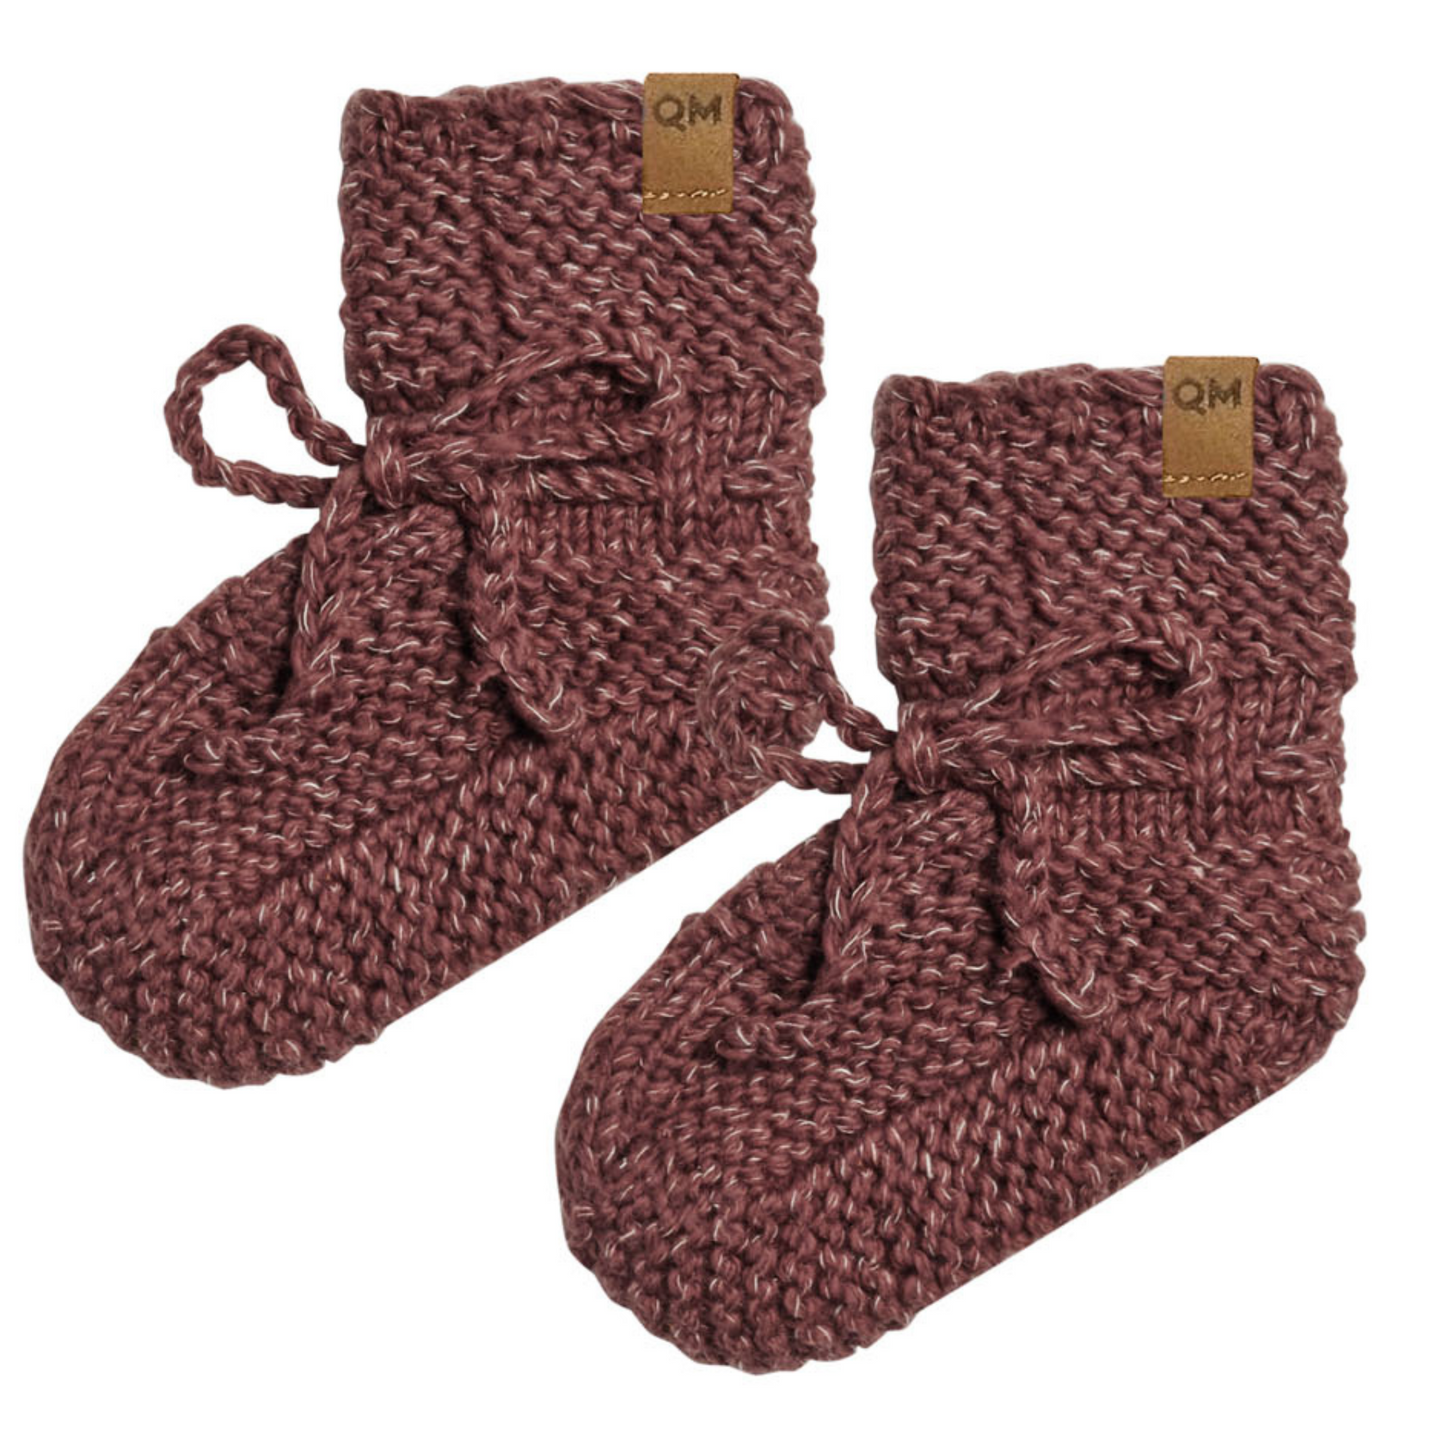 Speckled Knit Booties, Heathered Plum